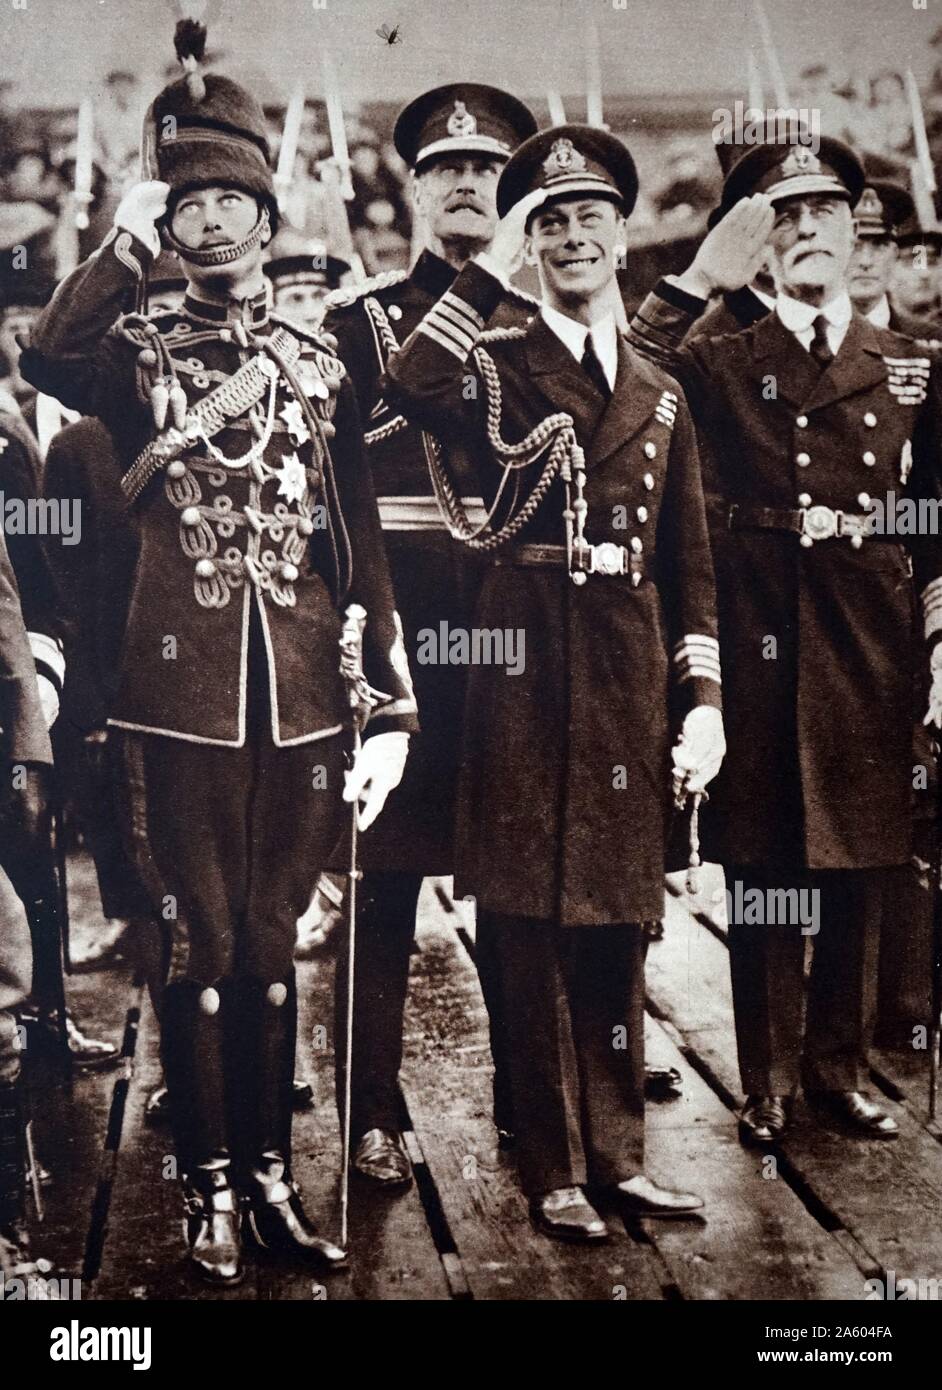 Photograph of Prince Albert Frederick Arthur George (1895-1952) and Prince Henry, Duke of Gloucester (1900-1974) awaiting the return of their brother, of Edward, Prince of Wales (1894-1972) Dated 20th Century Stock Photo